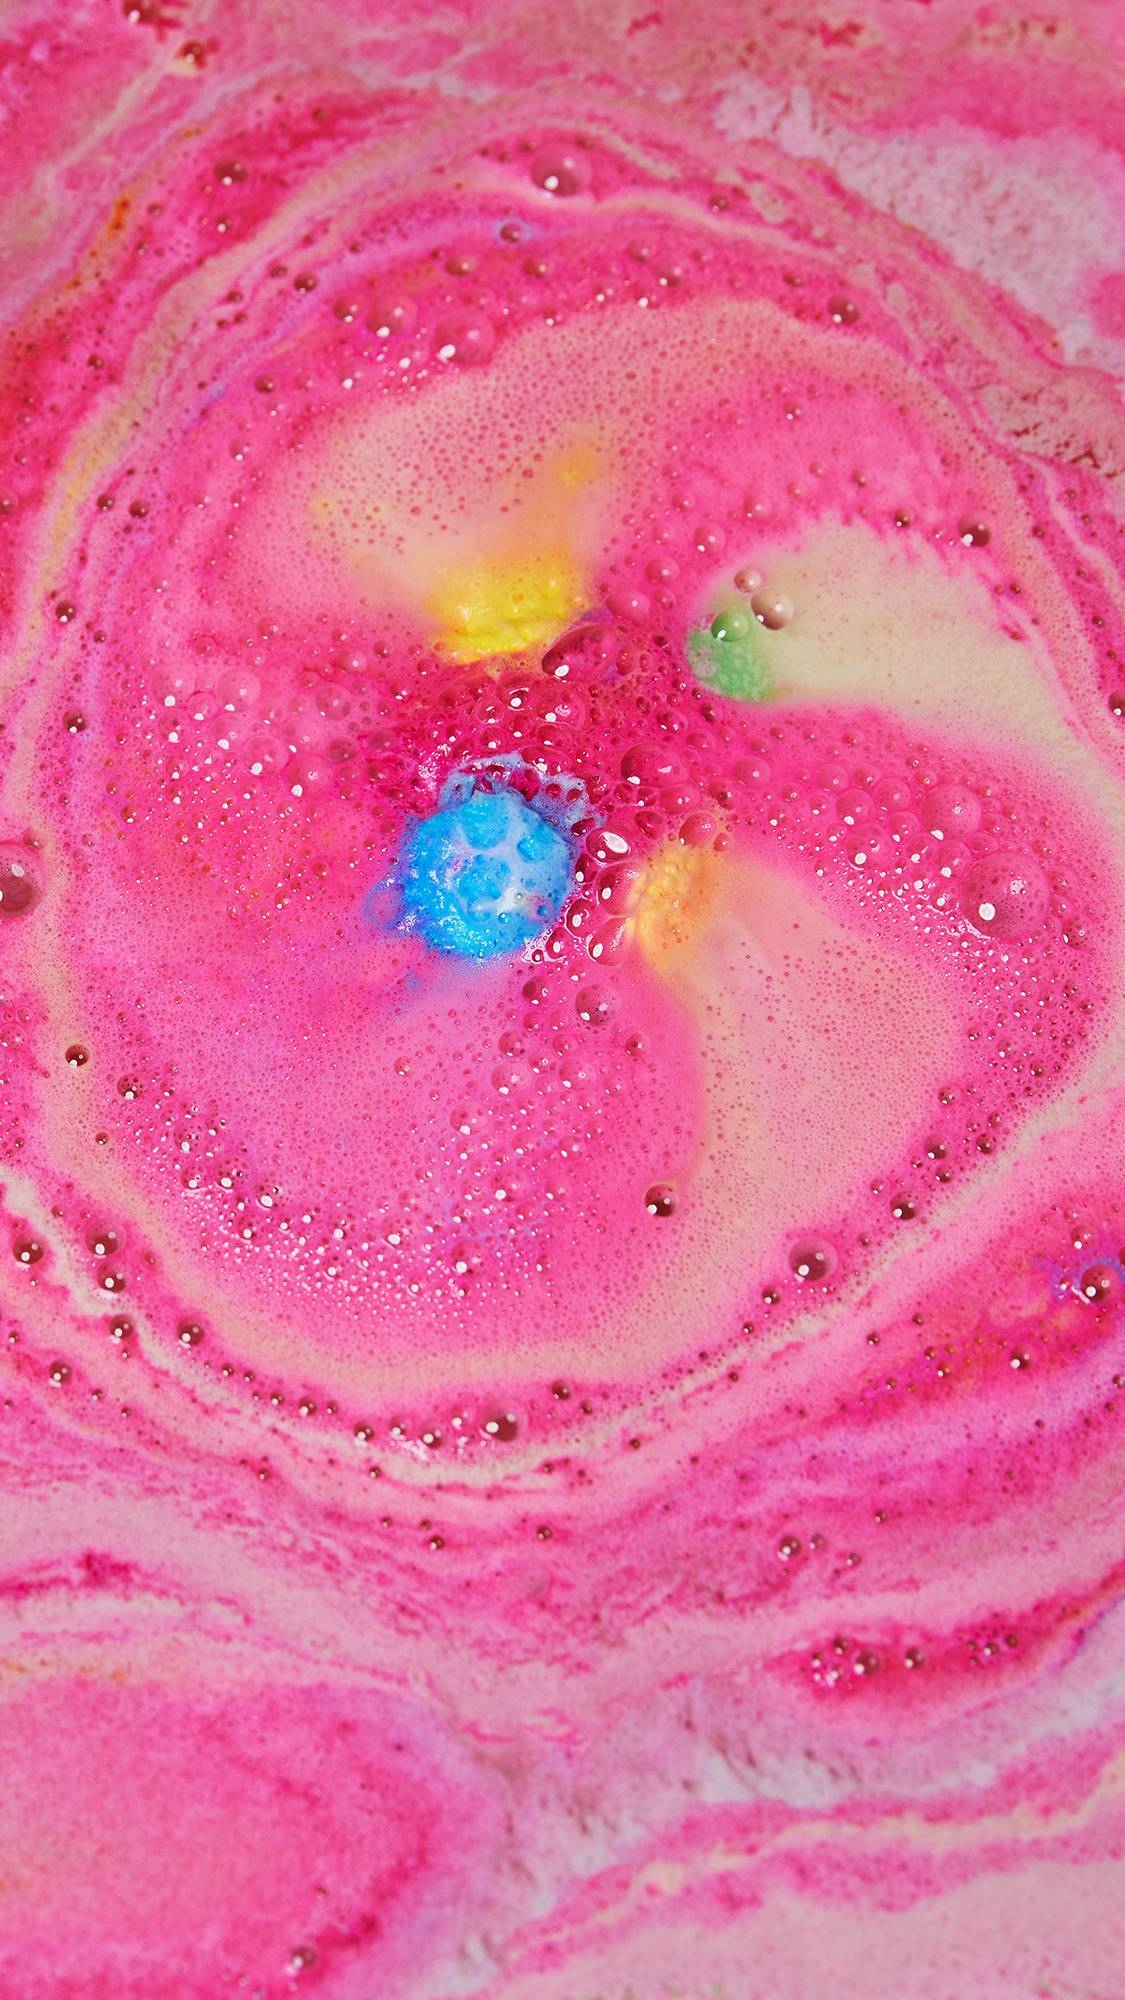 The bright pink egg part of the bath bomb sits spinning in the water giving off hot pink foam with flashes of yellow, green and blue. 